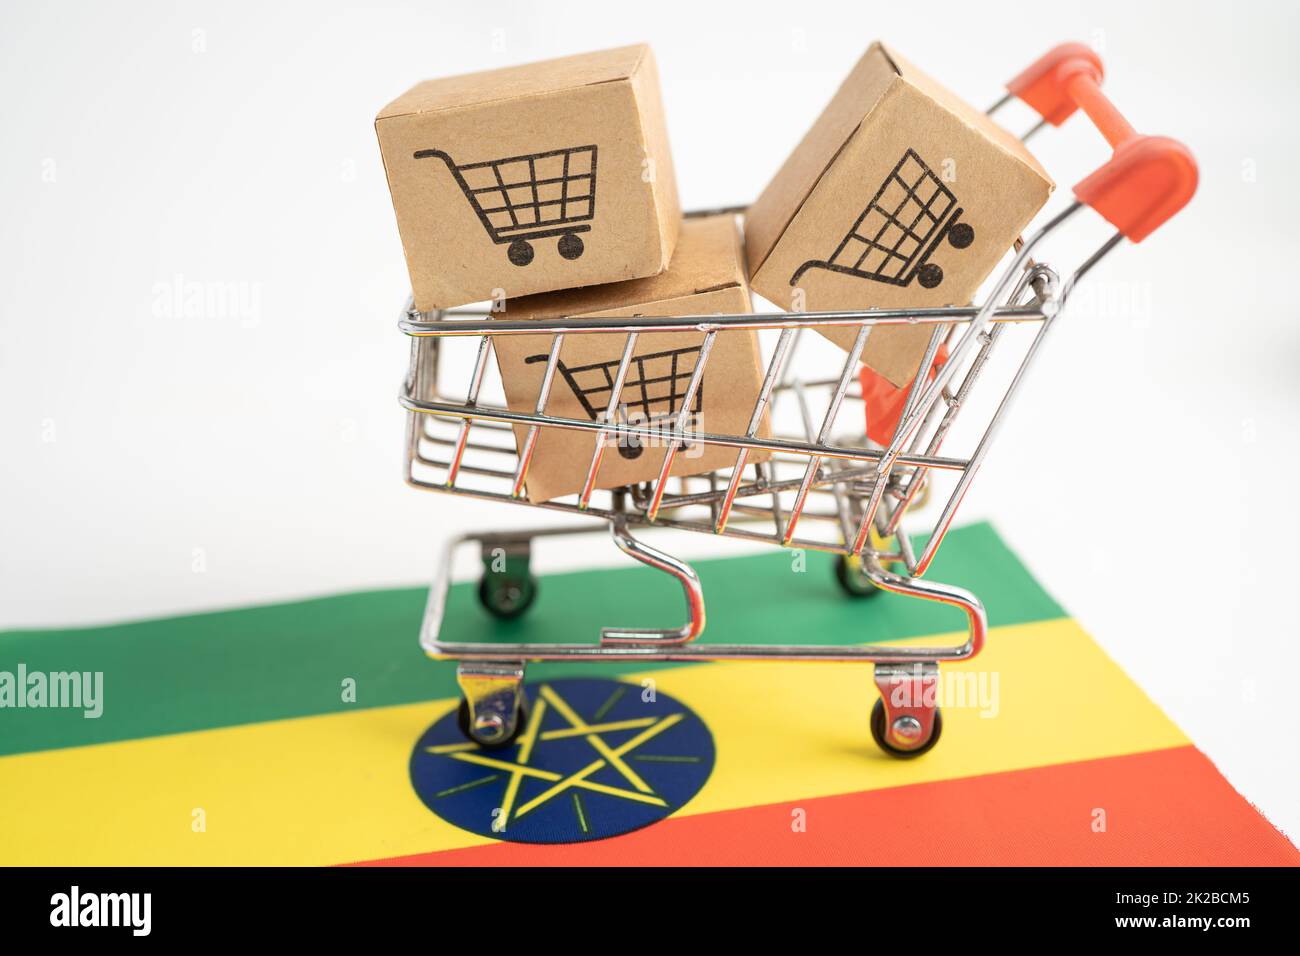 Box with shopping cart logo and Ethiopia flag, Import Export Shopping online or eCommerce finance delivery service store product shipping, trade, supplier concept. Stock Photo